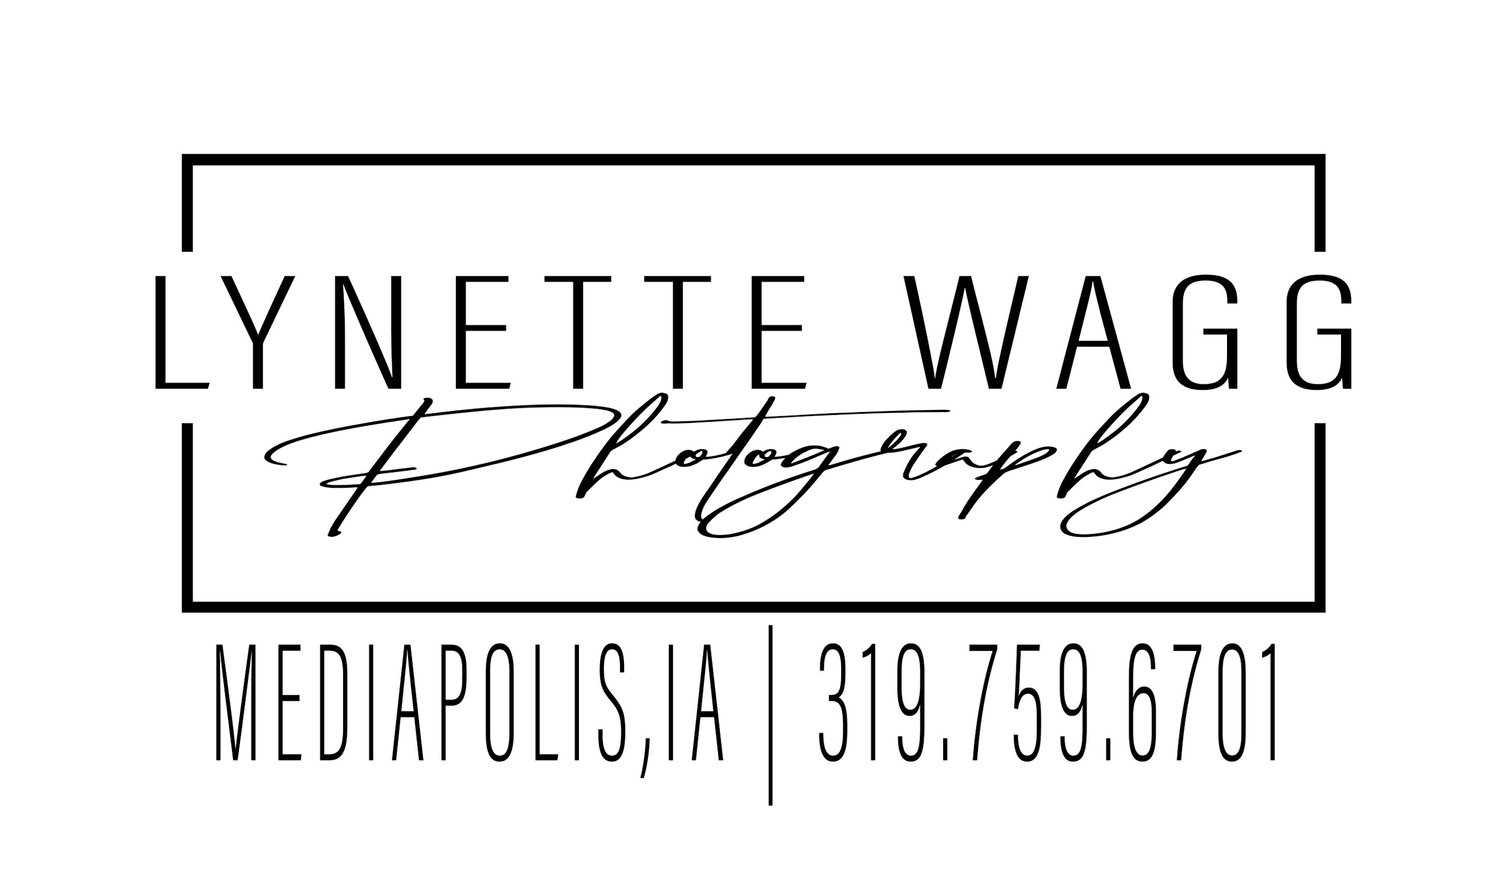 LYNETTE WAGG PHOTOGRAHY